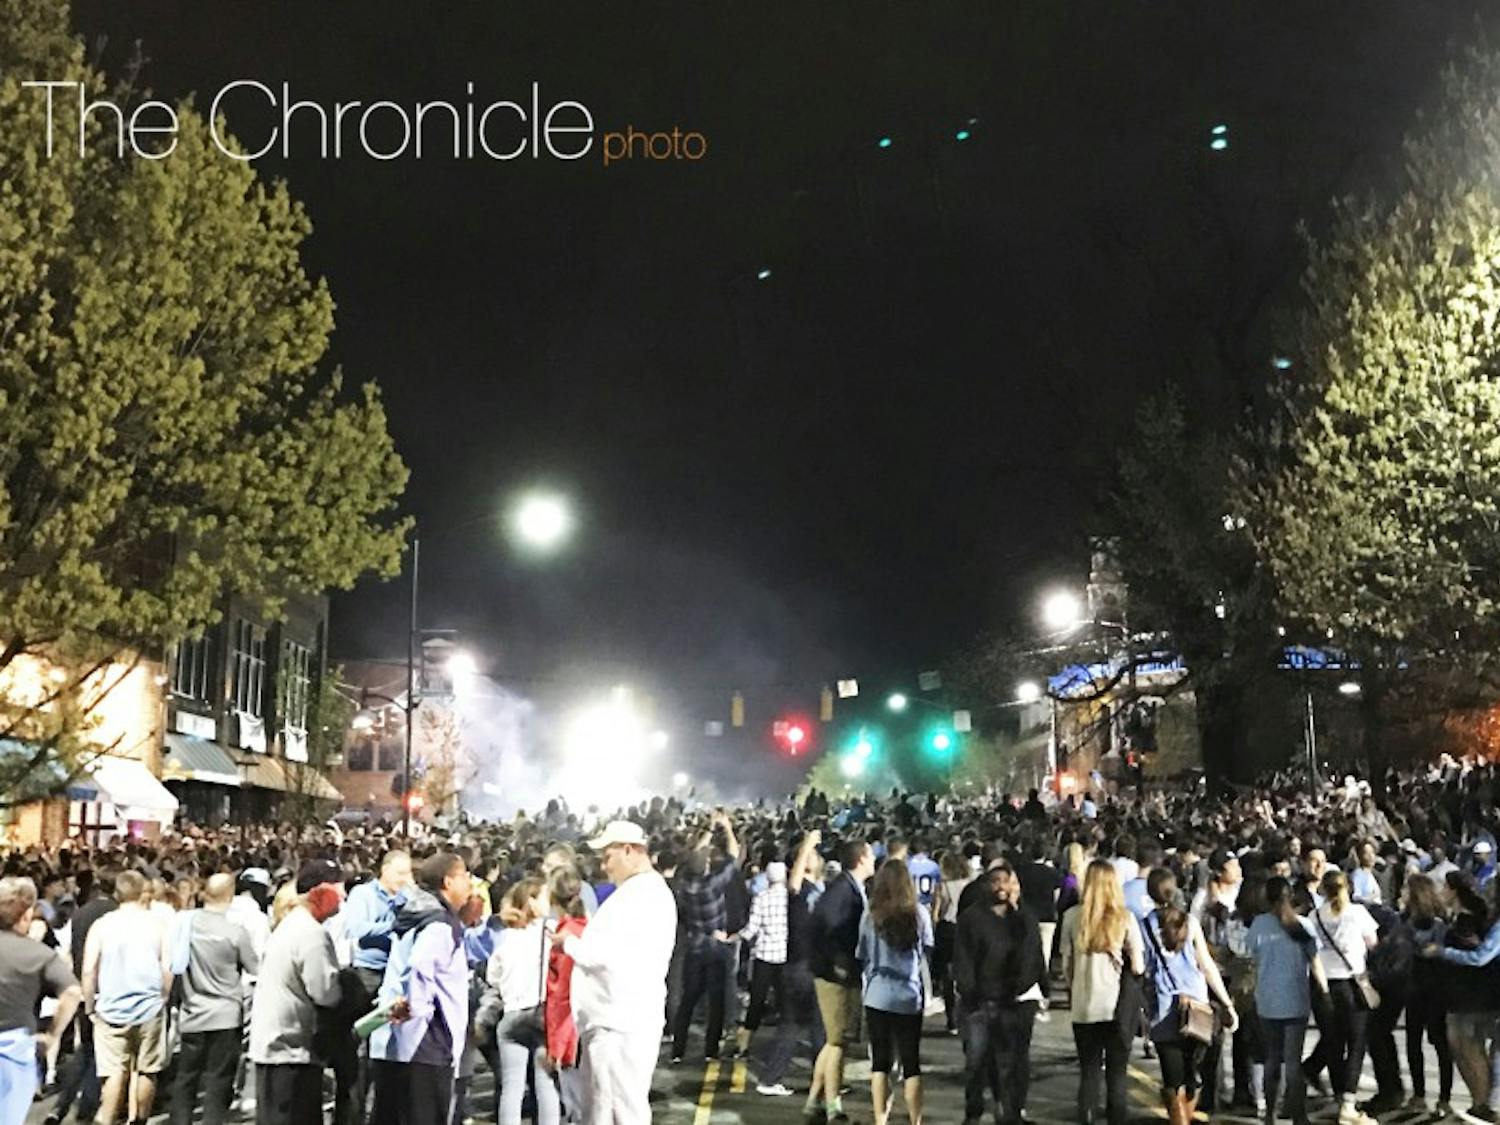 Thousands of North Carolina students flooded Franklin Street after Monday's national title game.&nbsp;